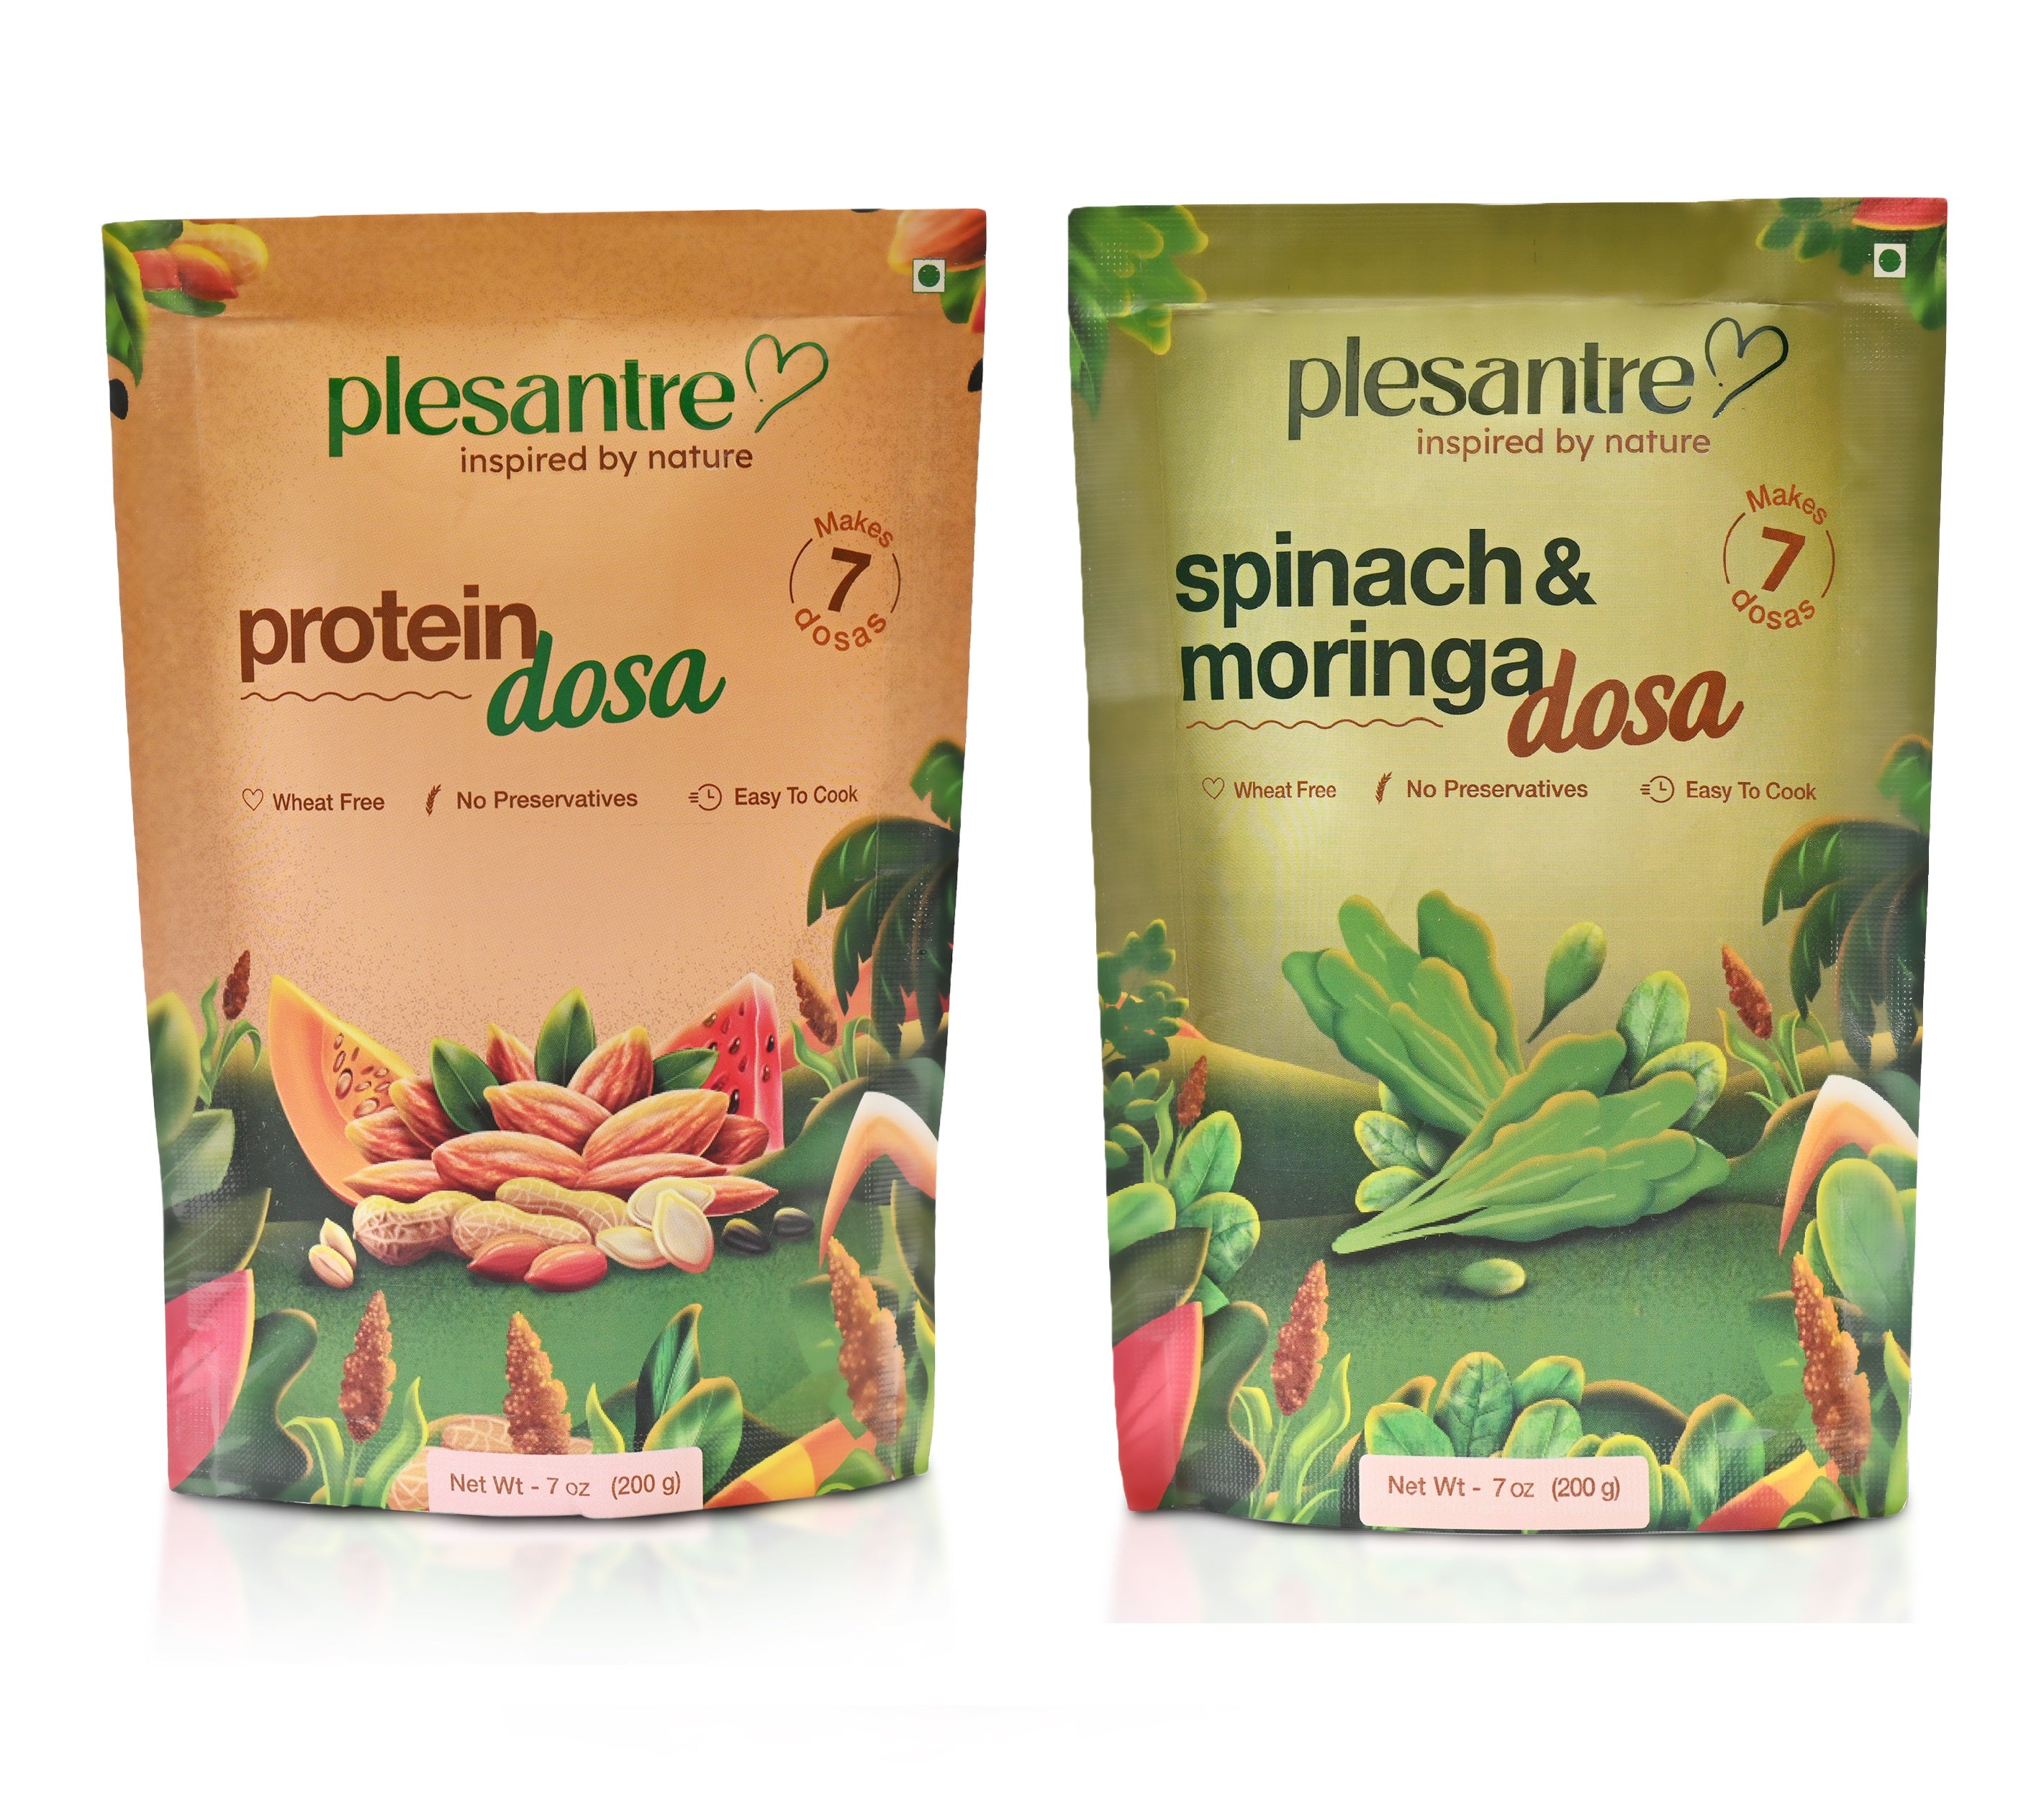 plesantre Combo of Dosas - Protein Dosa and Spinach & Moringa Dosa - Low Carb Instant Ready to Cook Breakfast Batter Premix